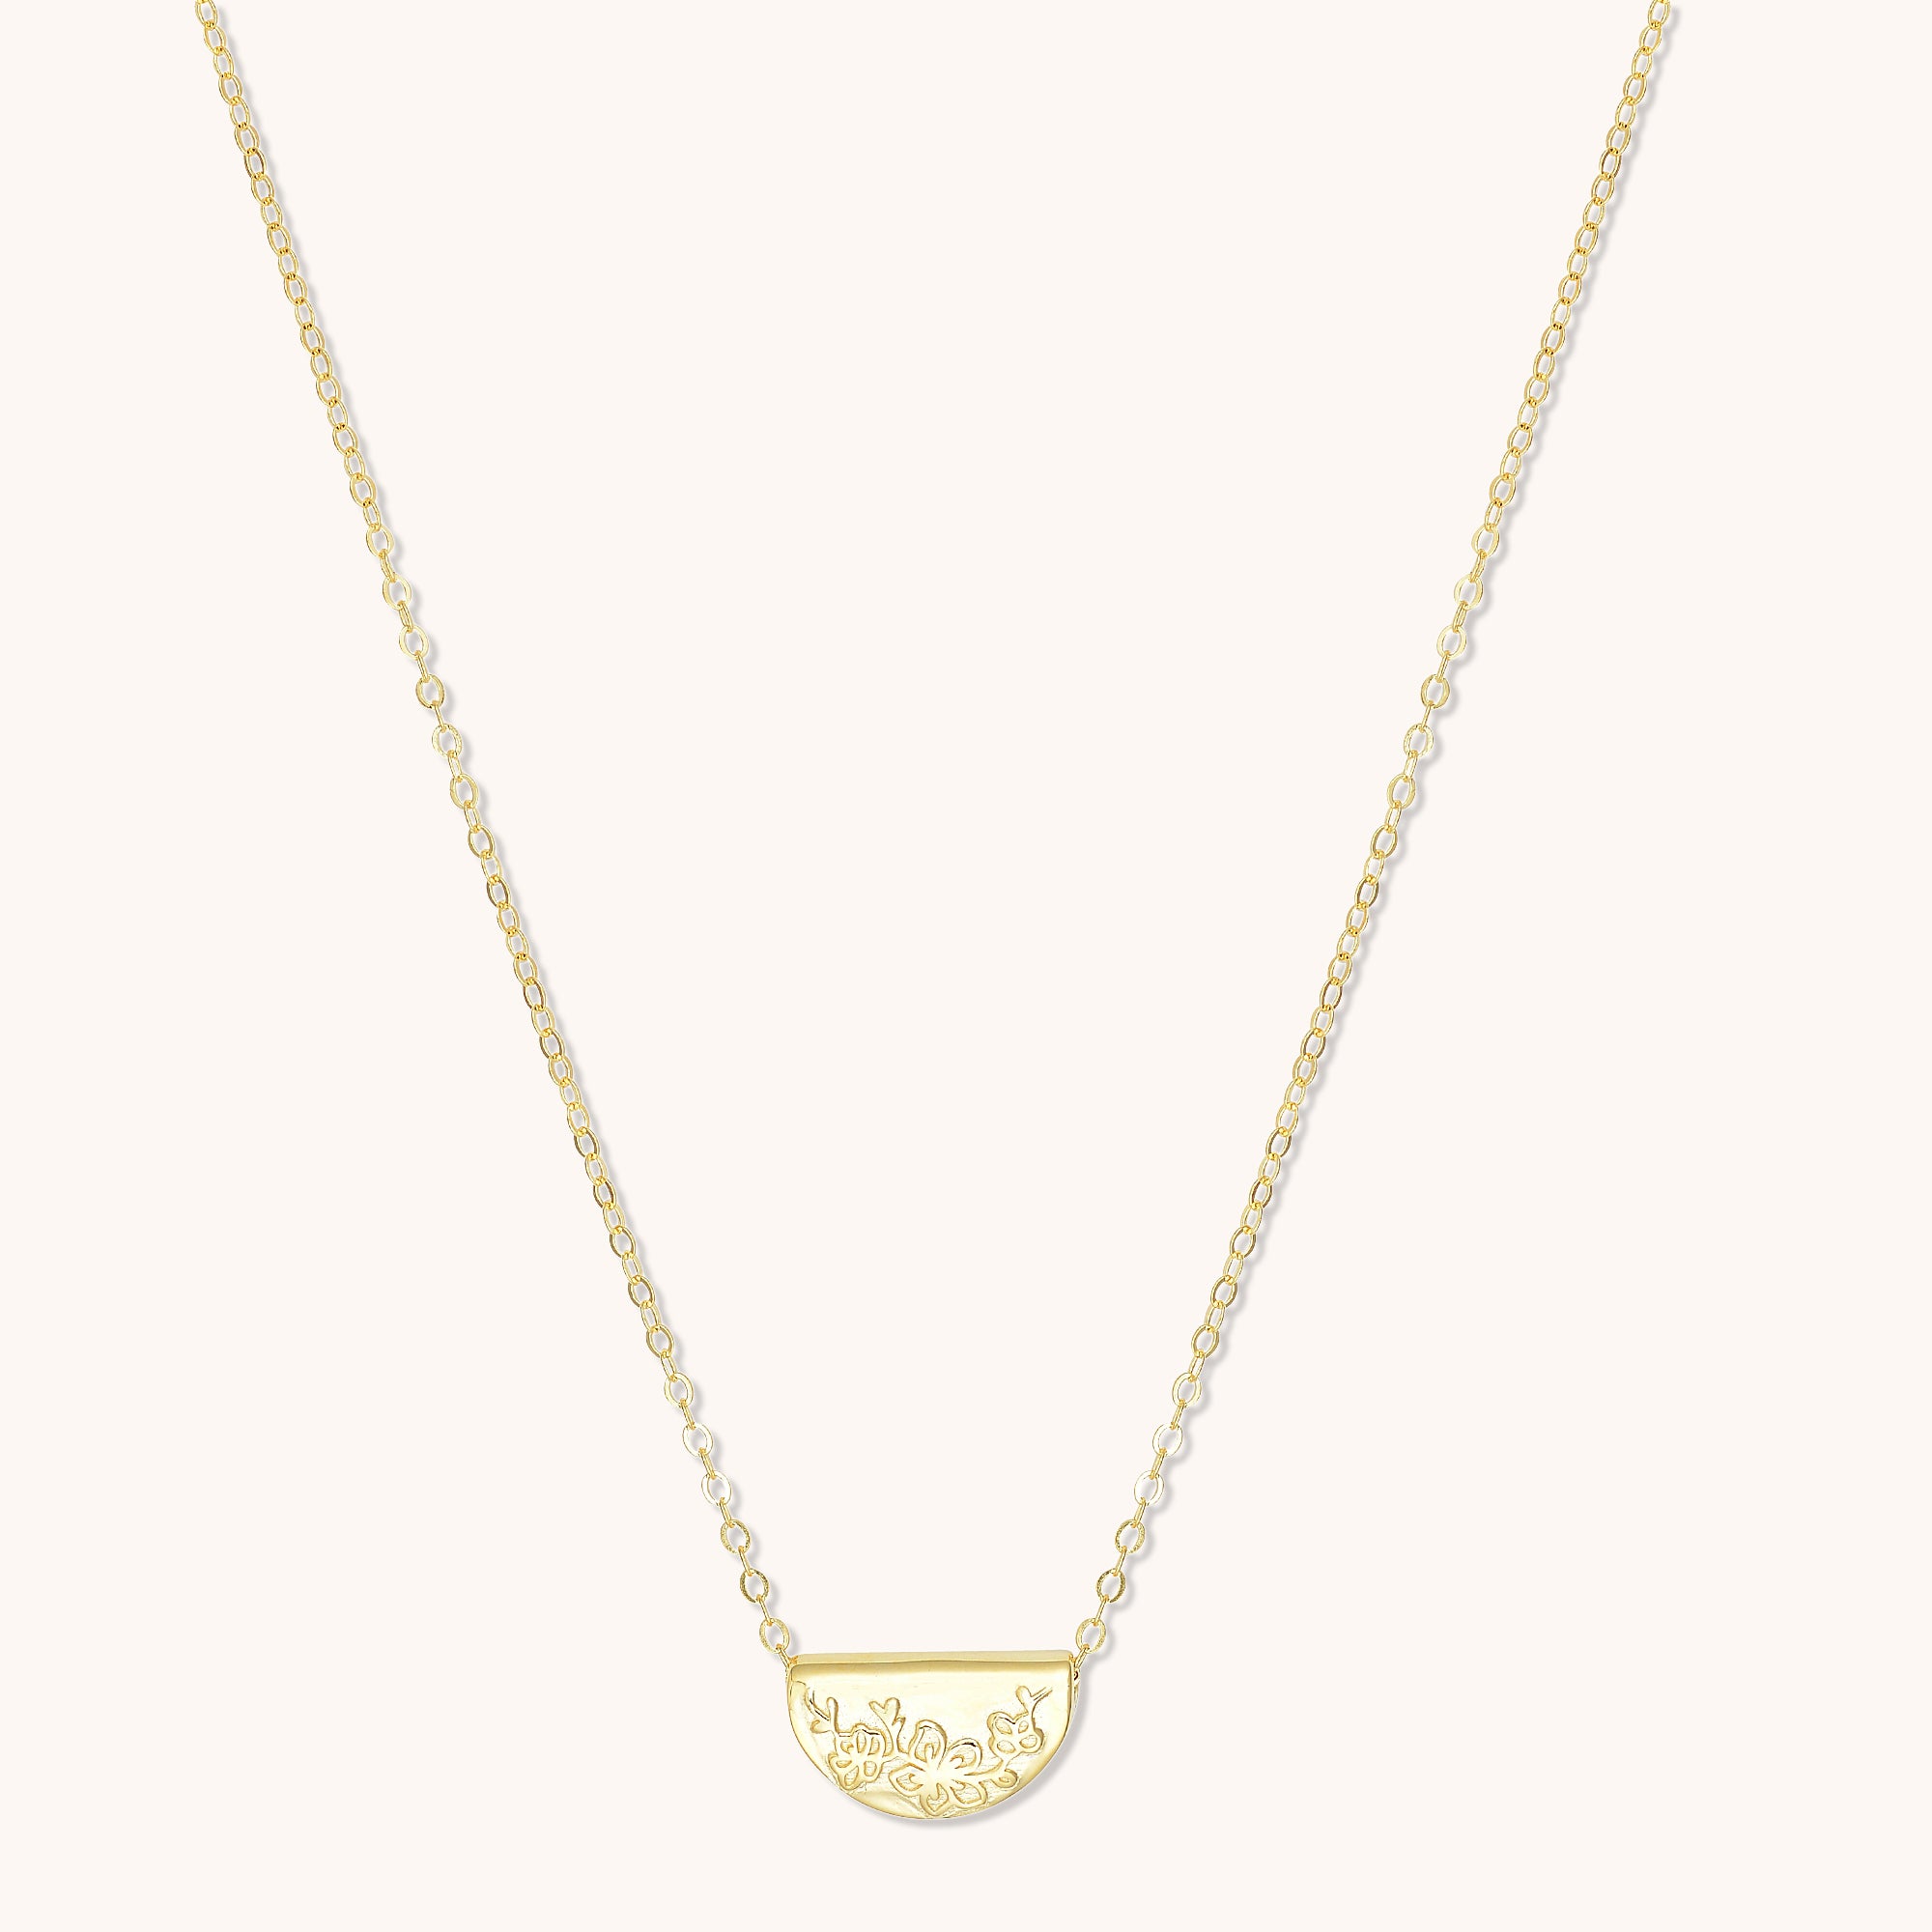 Birth Flower Necklace March (Cherry Blossom) Gold